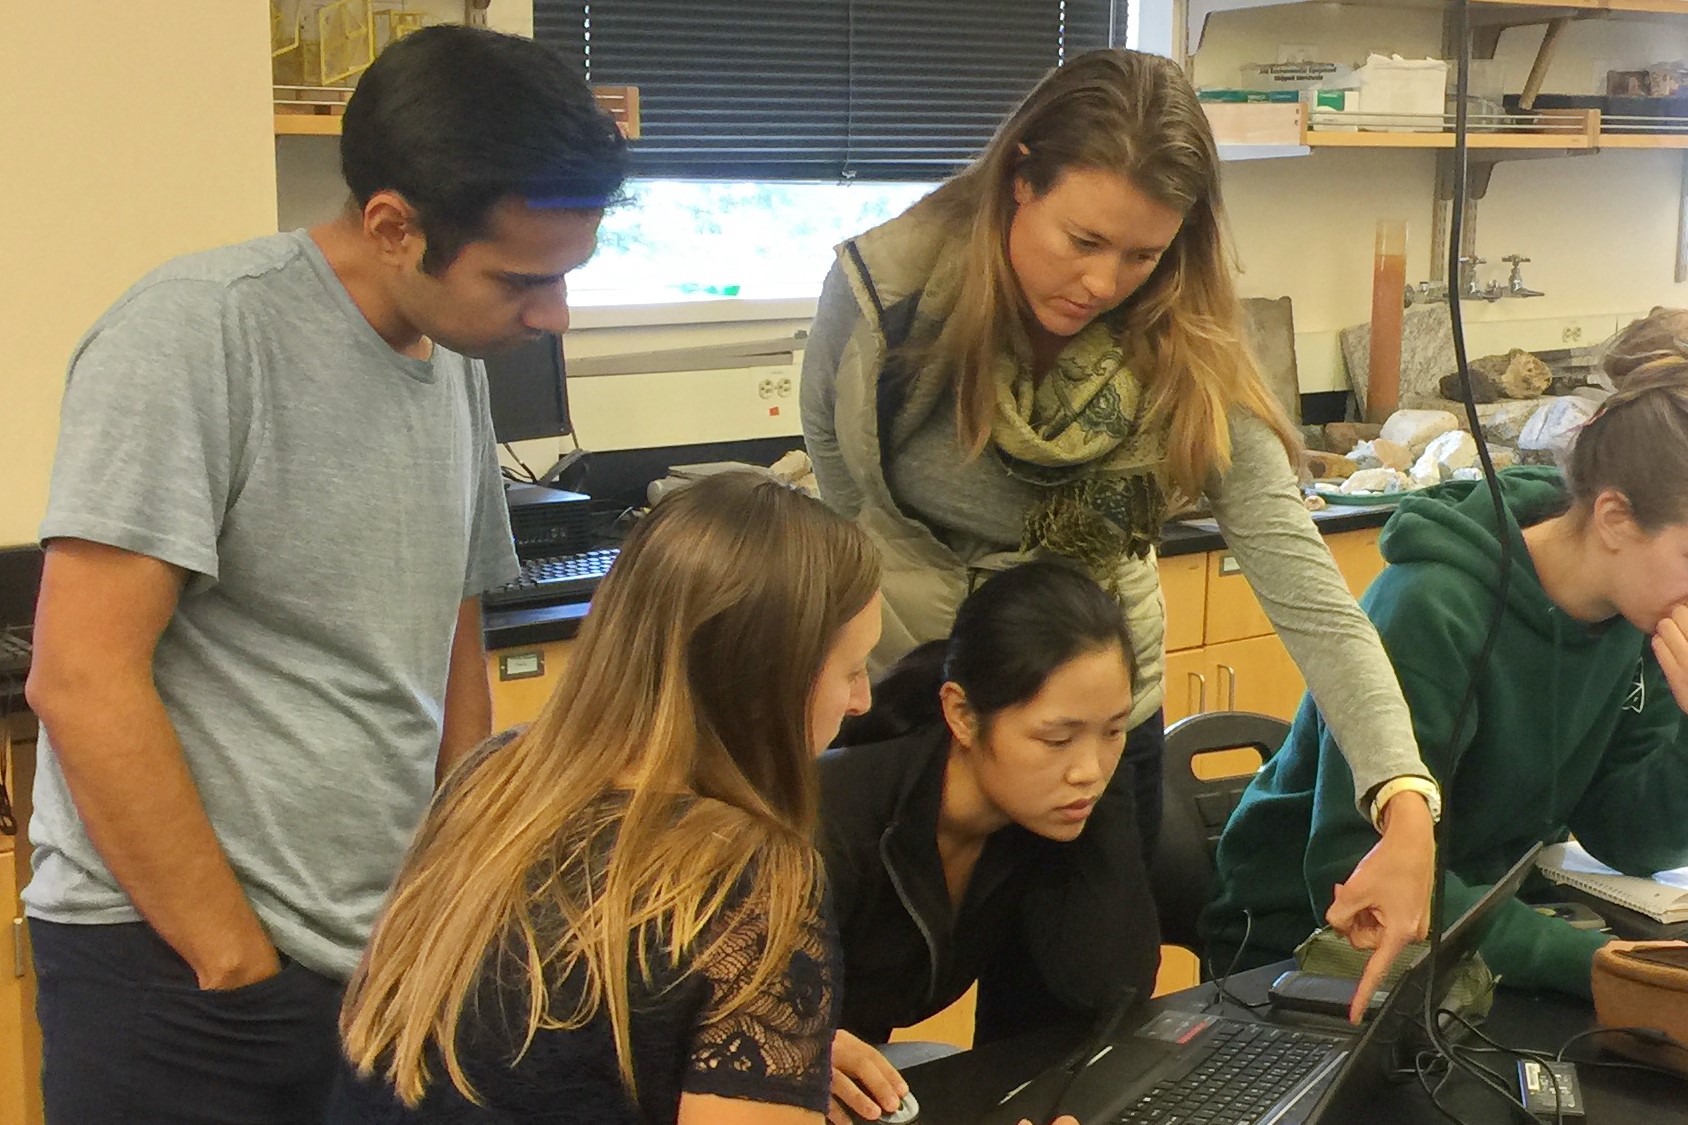 Environmental Science master's students collaborating on a computer in a science lab